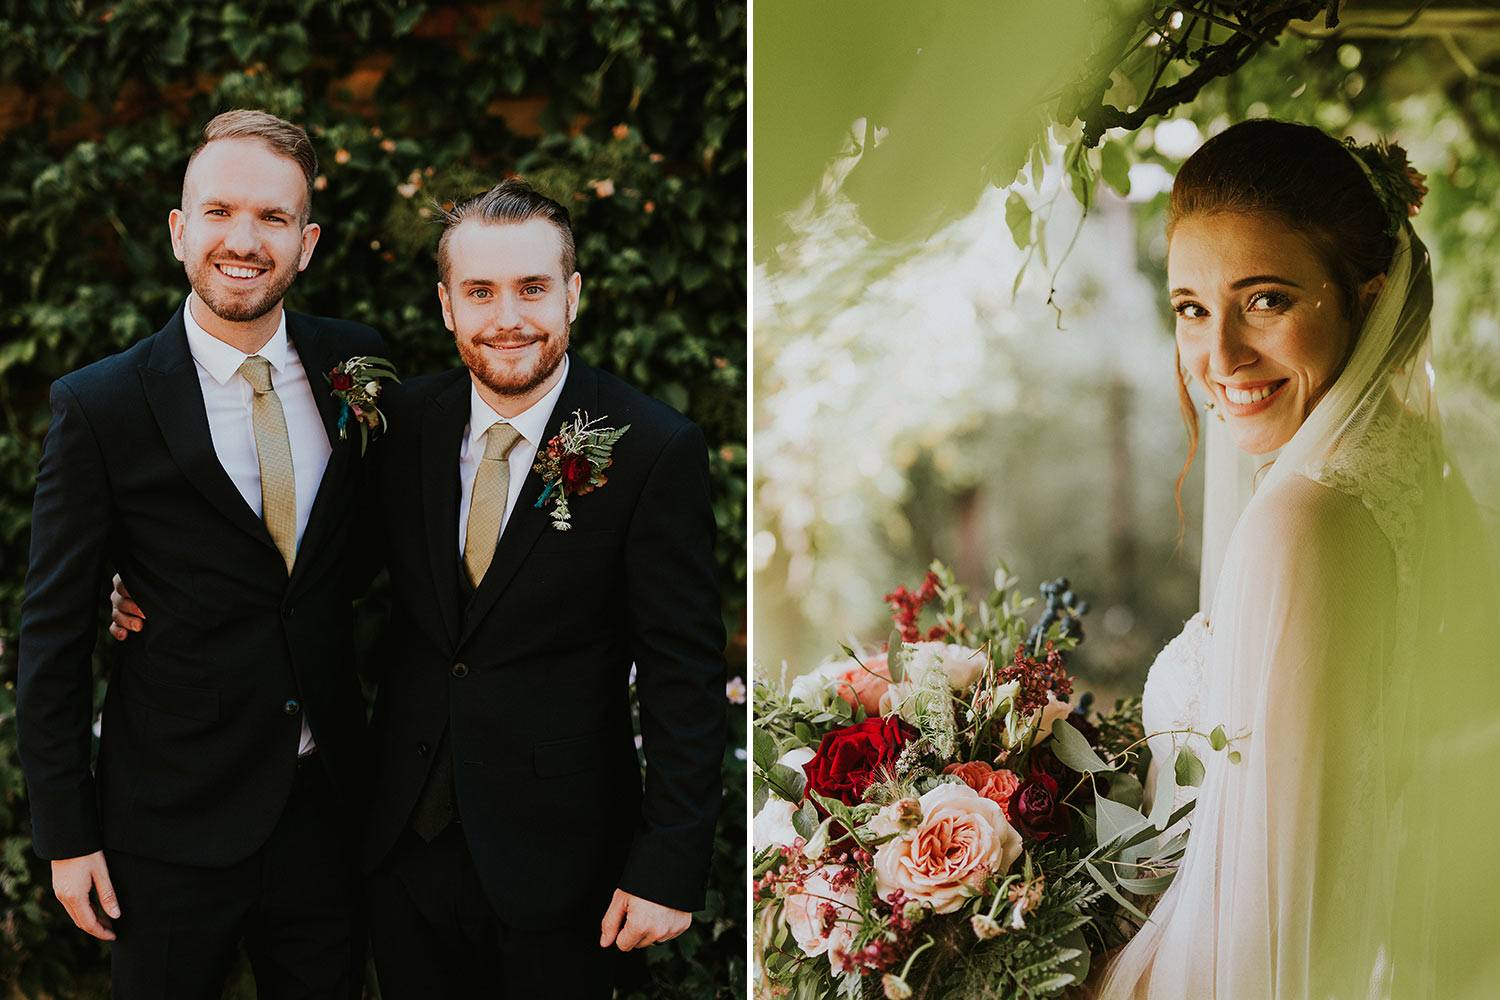 Groom with groomsman and bride with bouquet